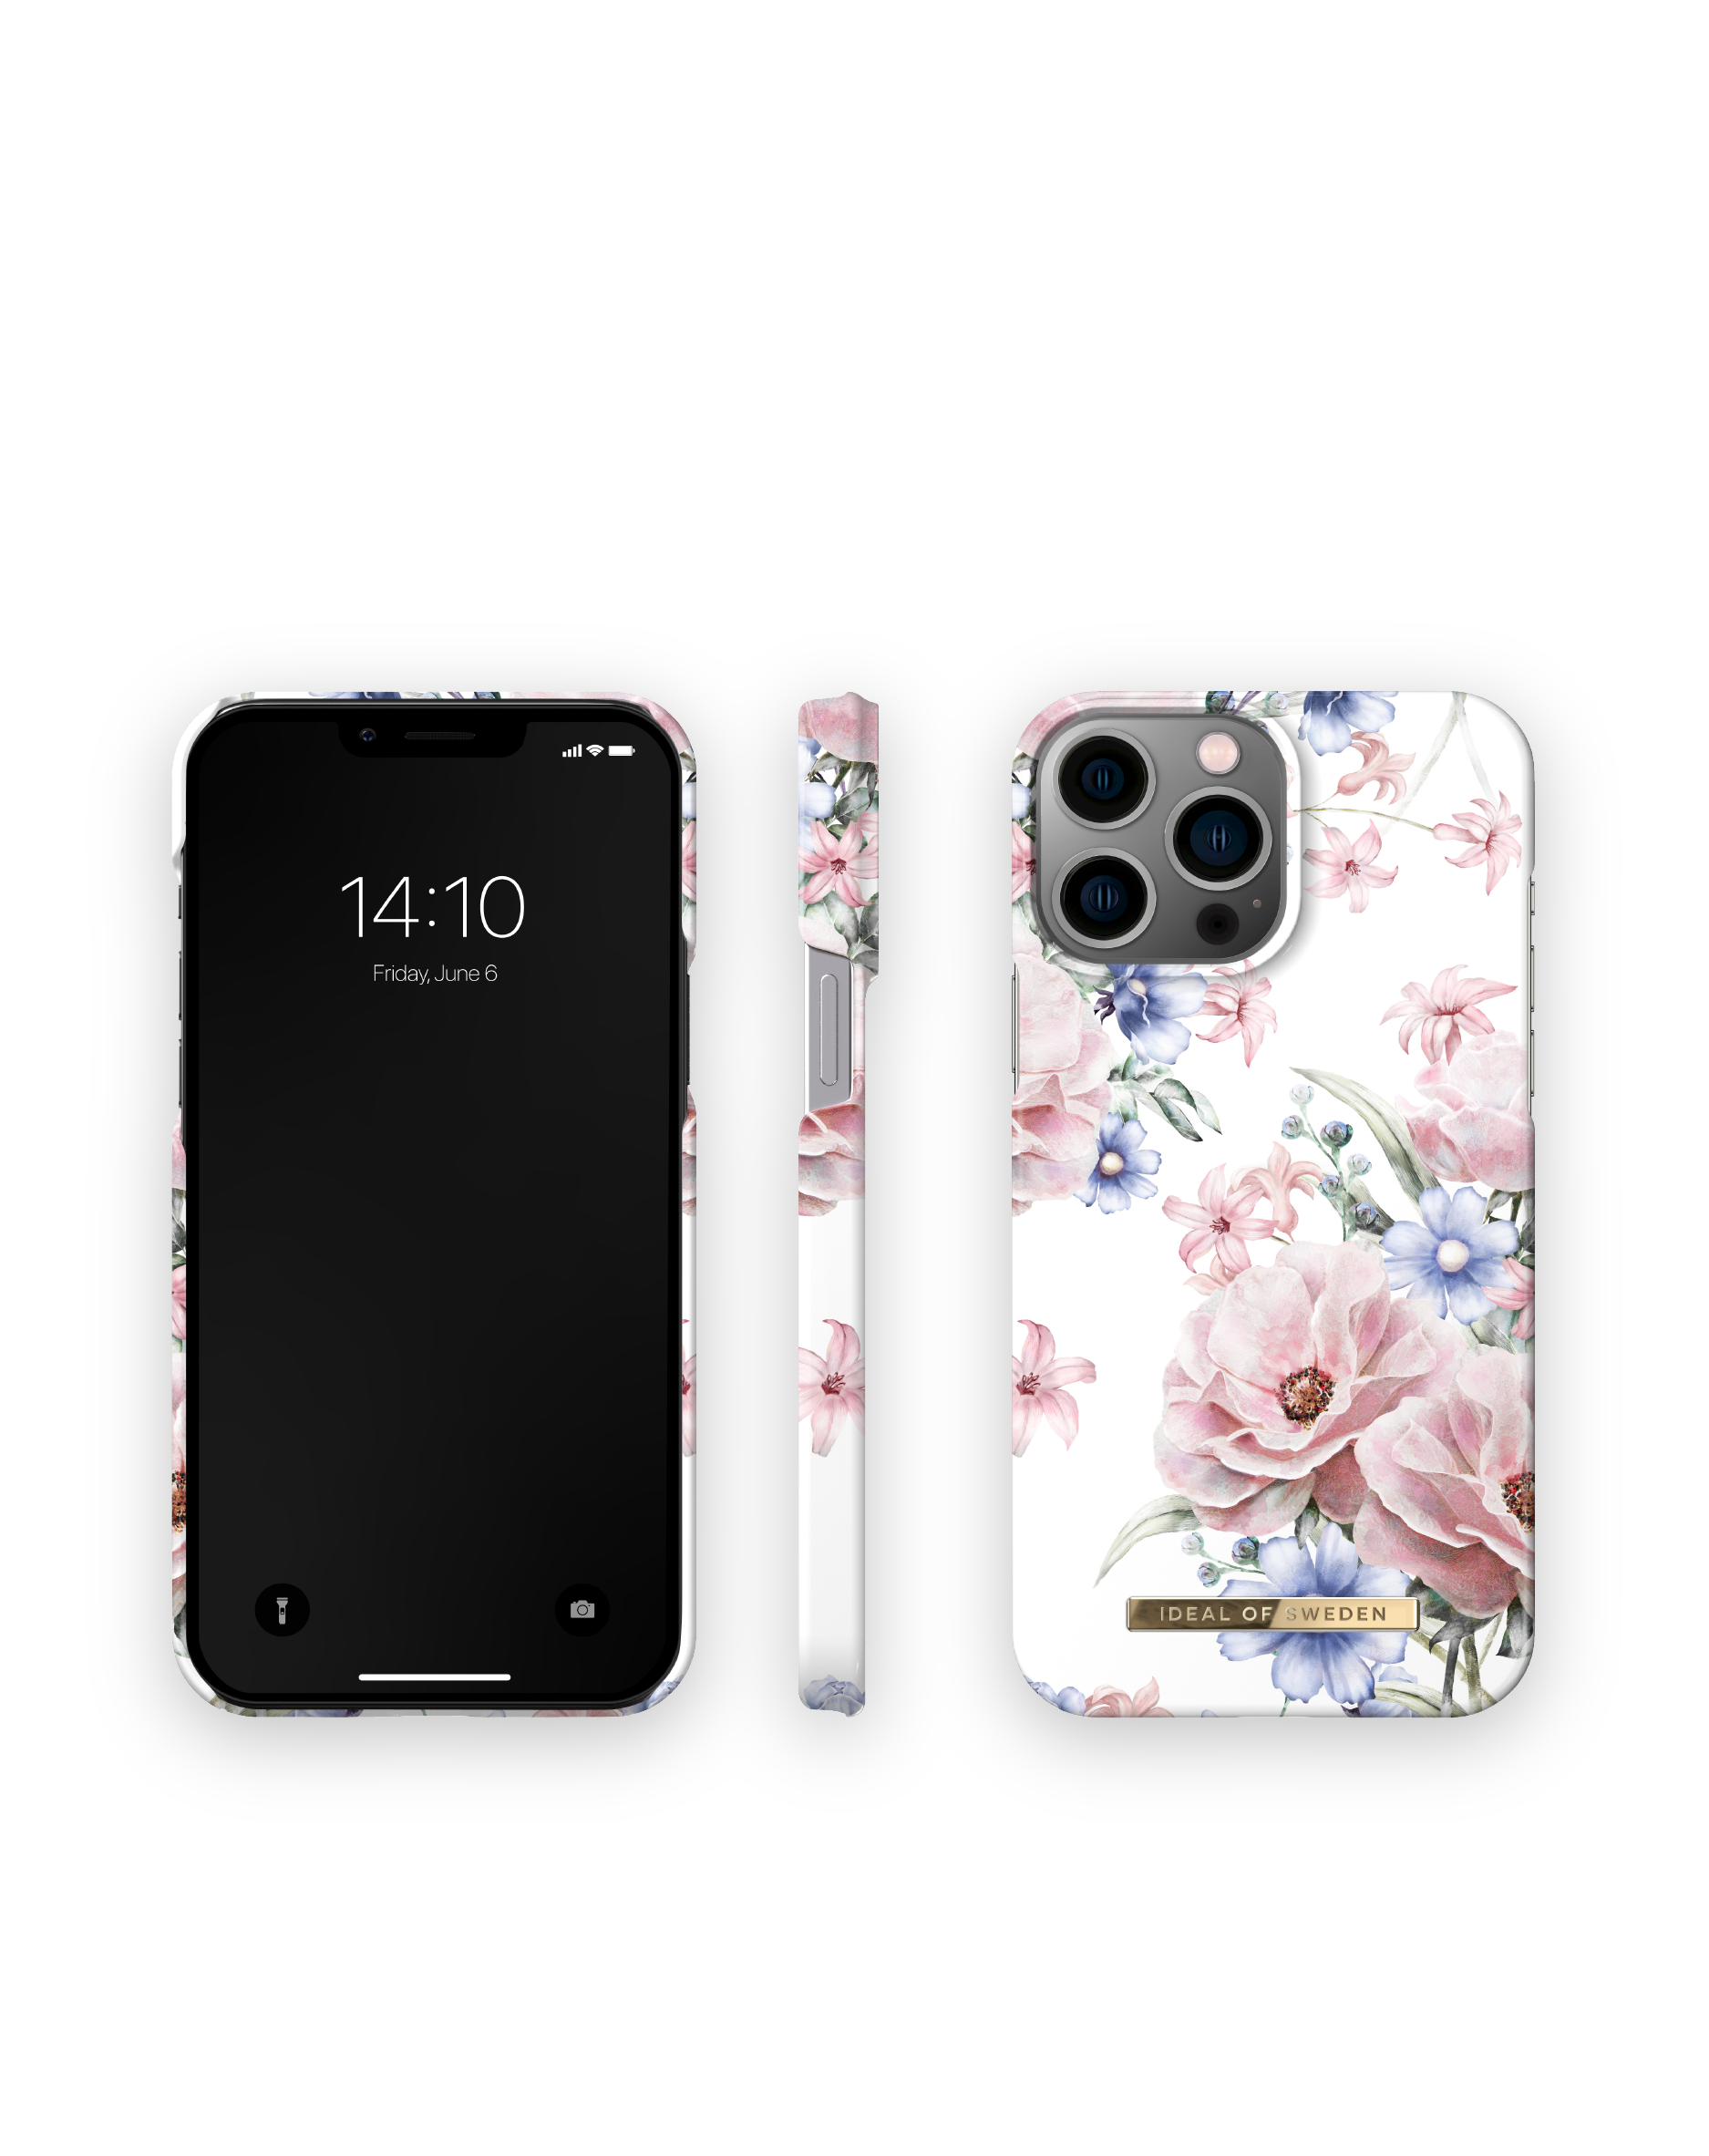 IDEAL Backcover, 14 iPhone OF IDFCSS17-I2267P-58, Floral Max, SWEDEN Pro Apple, Romance